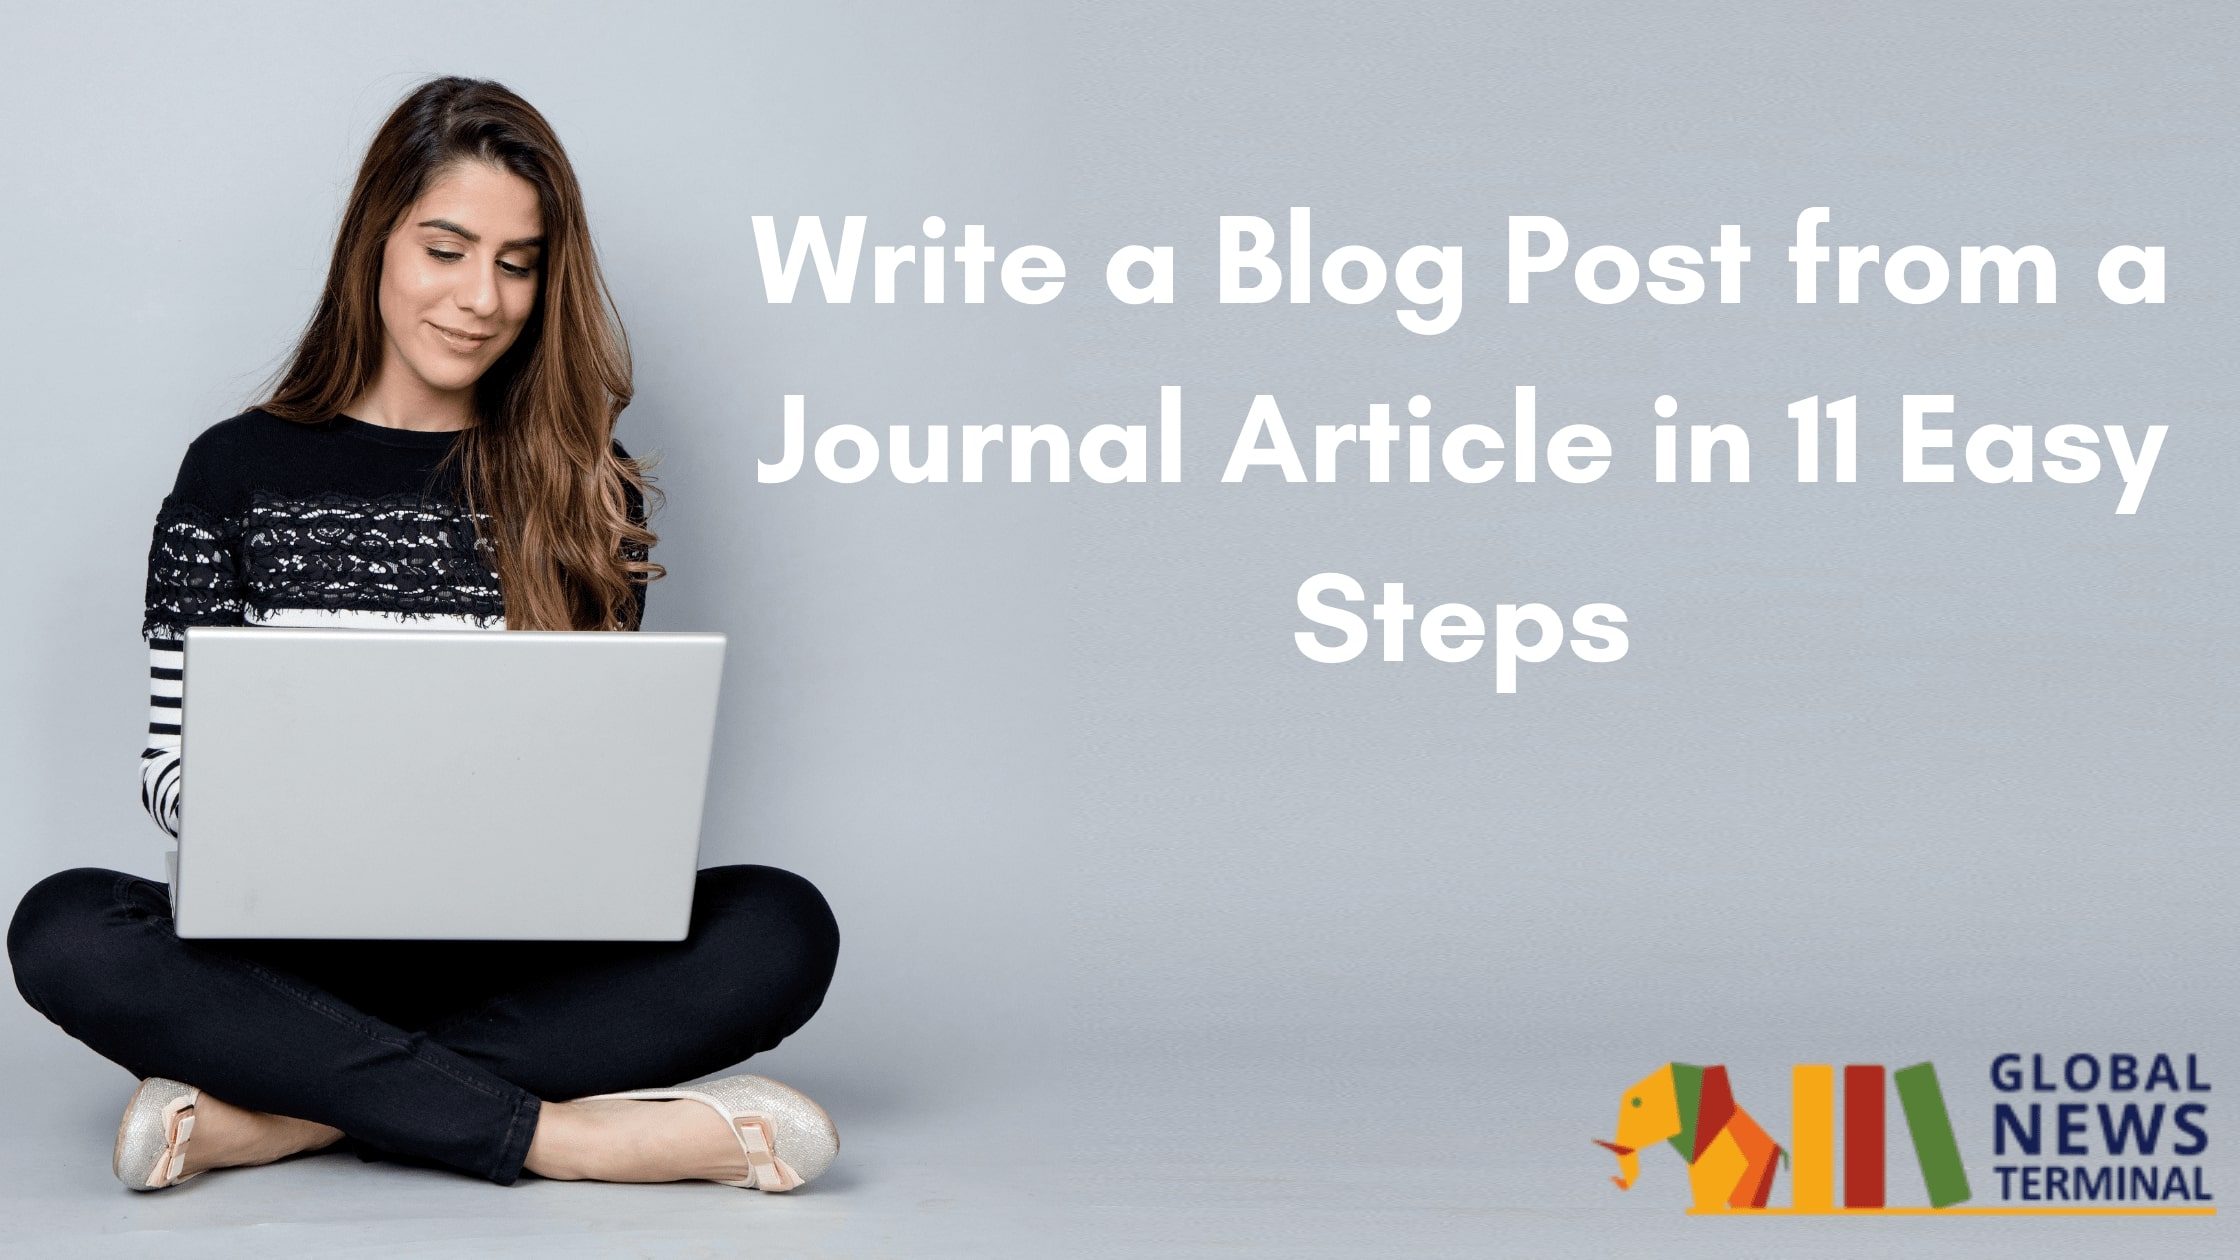 How to write a blog post from a journal article in 11 easy steps